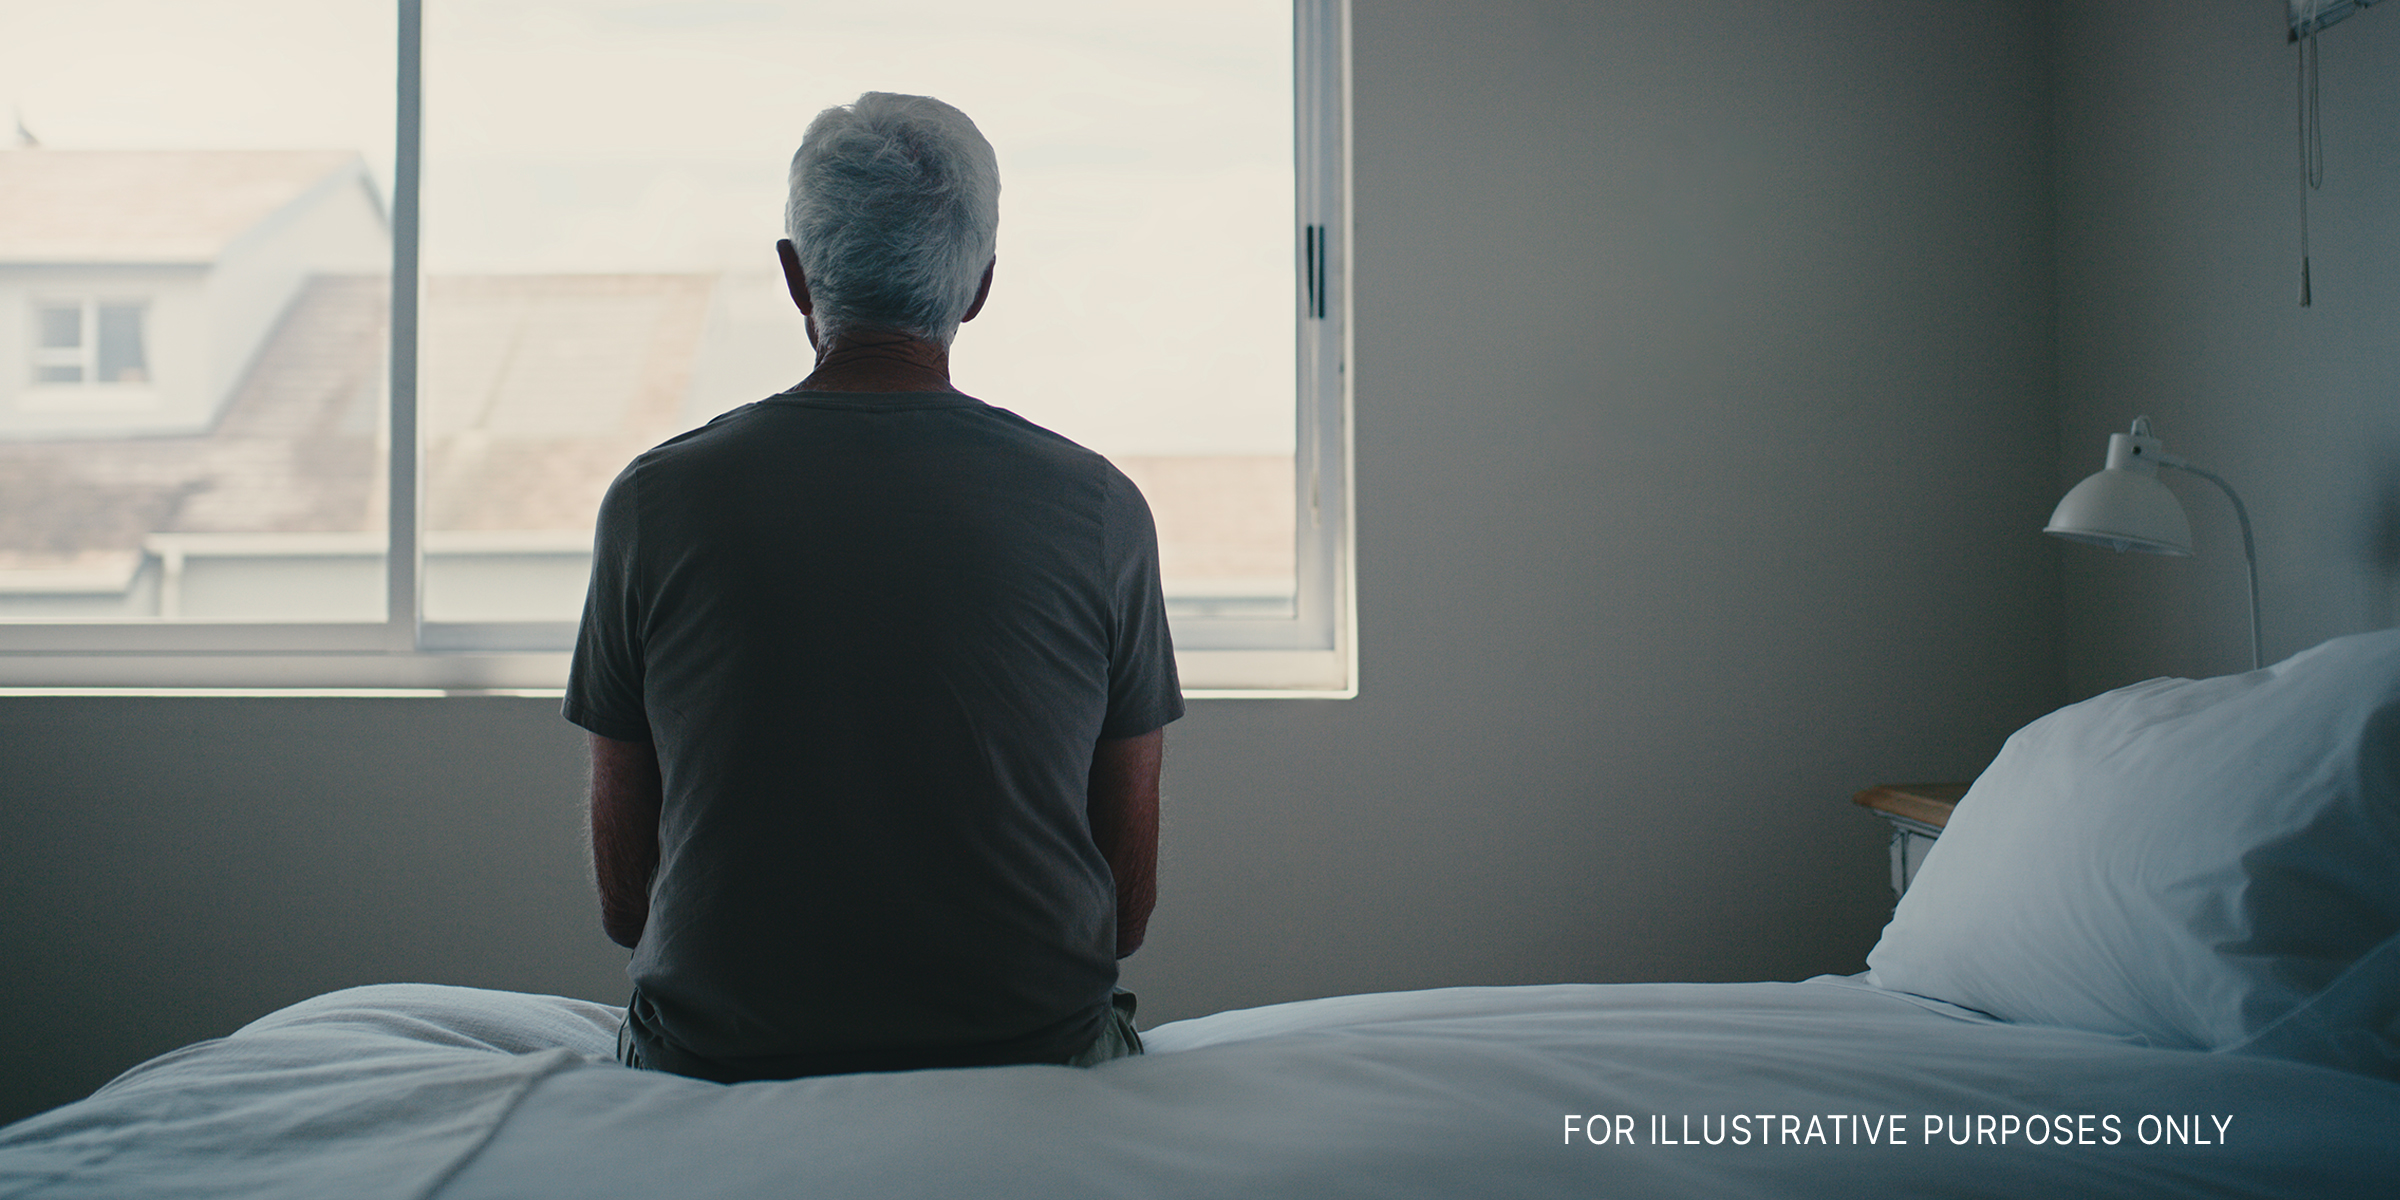 A man sitting on a bed looking out a window | Source: Shutterstock